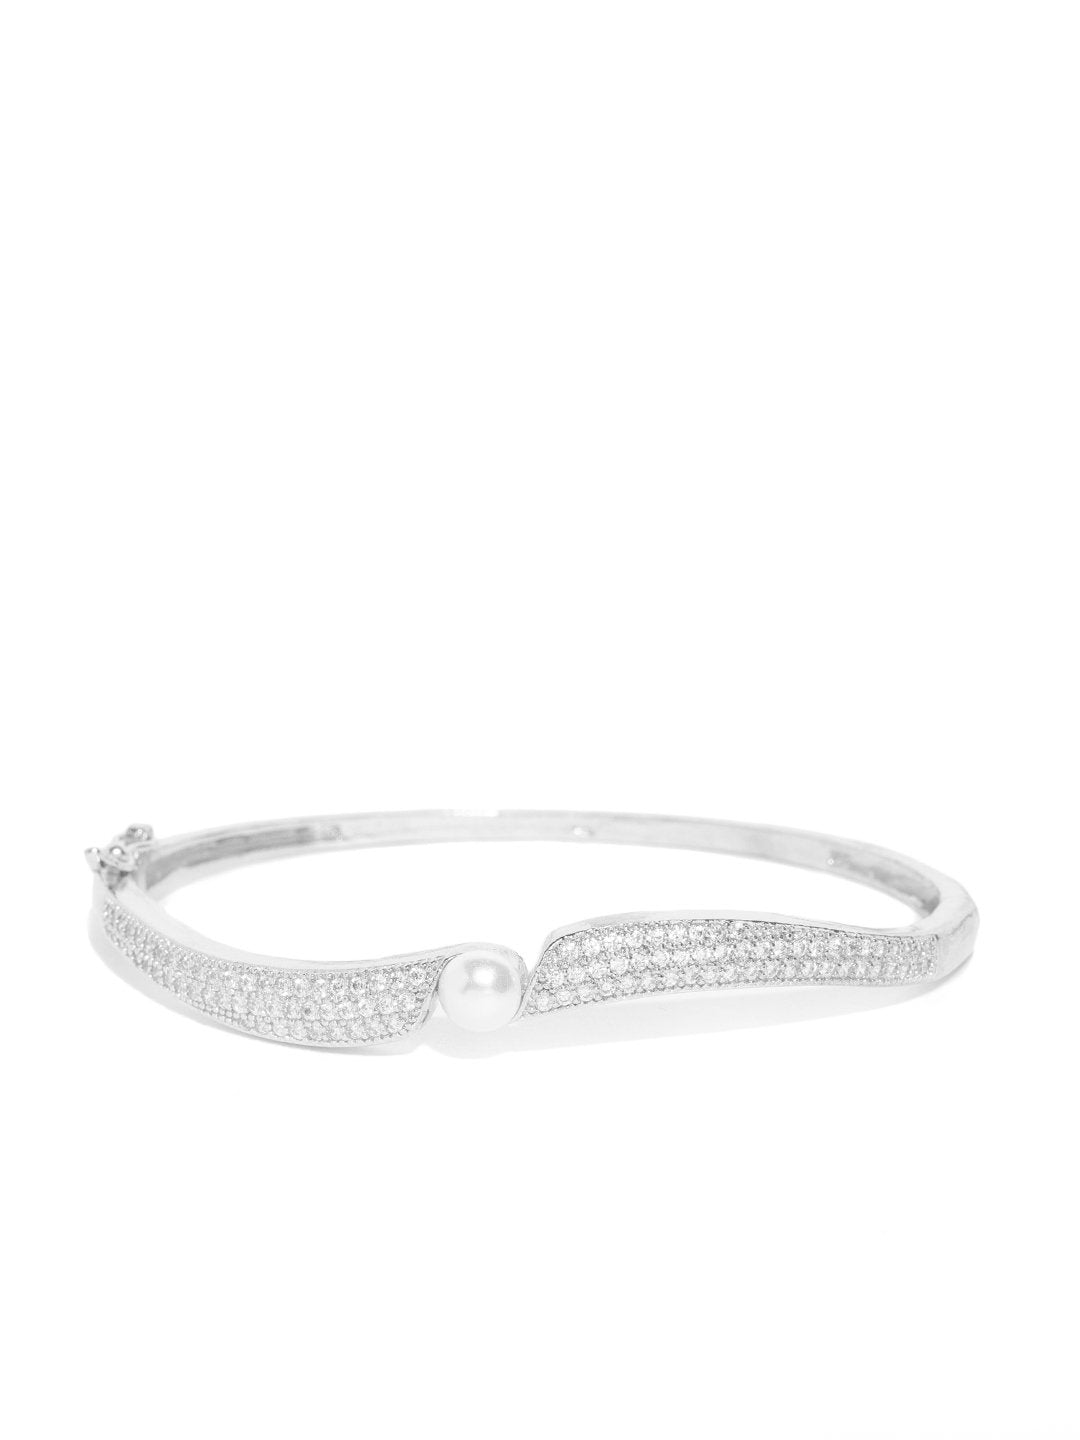 Women's Silver-Plated American Diamond and Pearls Studded Bracelet - Priyaasi